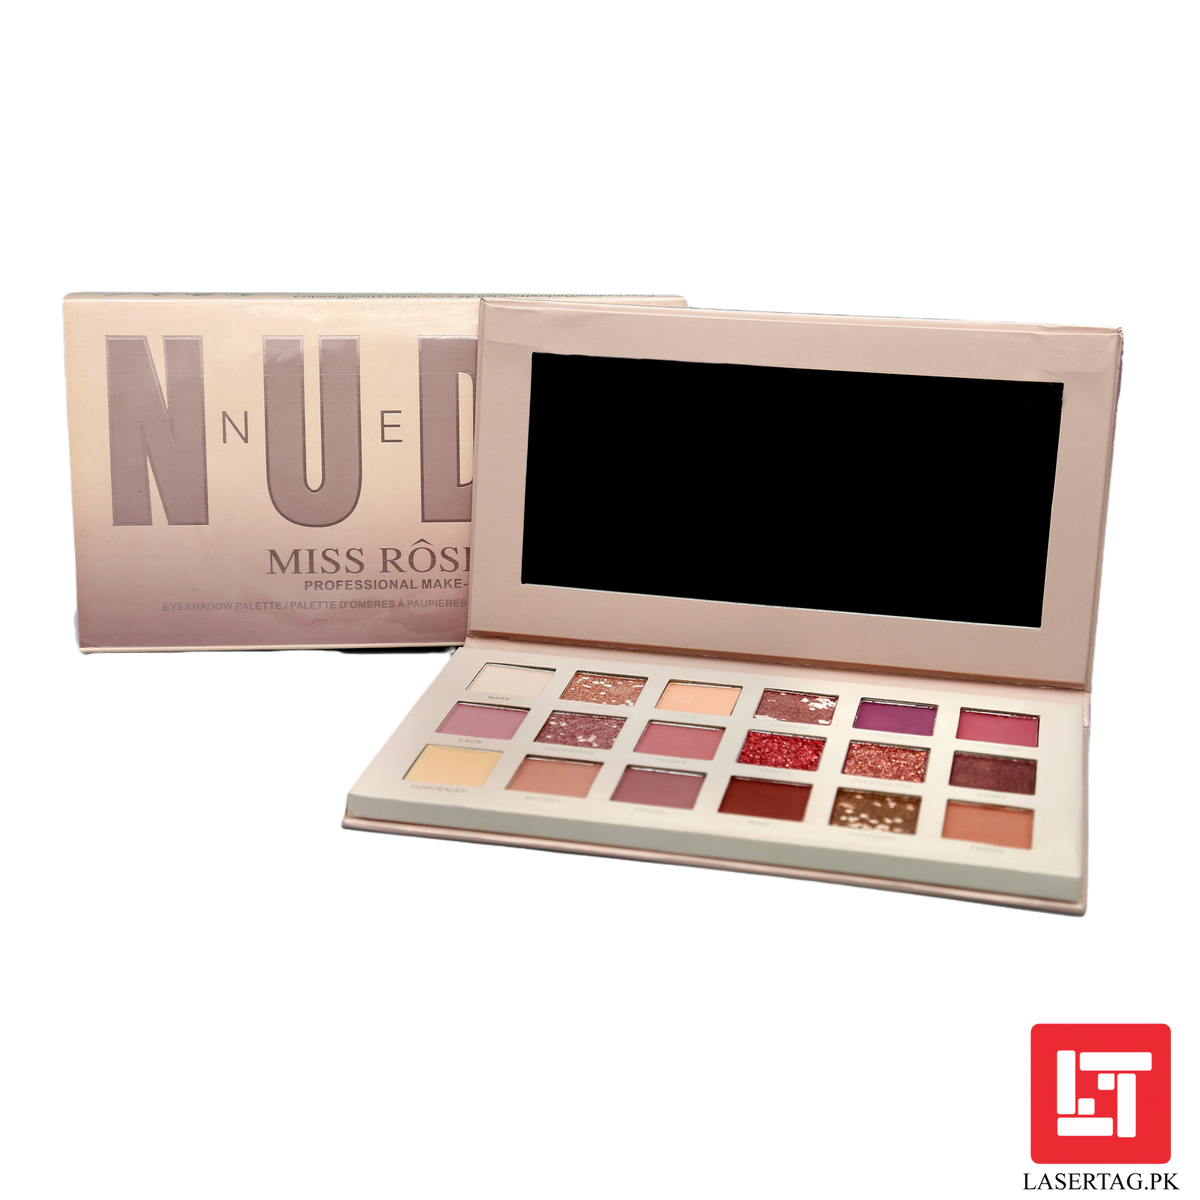 Miss Rose New Nude Palette 7001-002B freeshipping - lasertag.pk